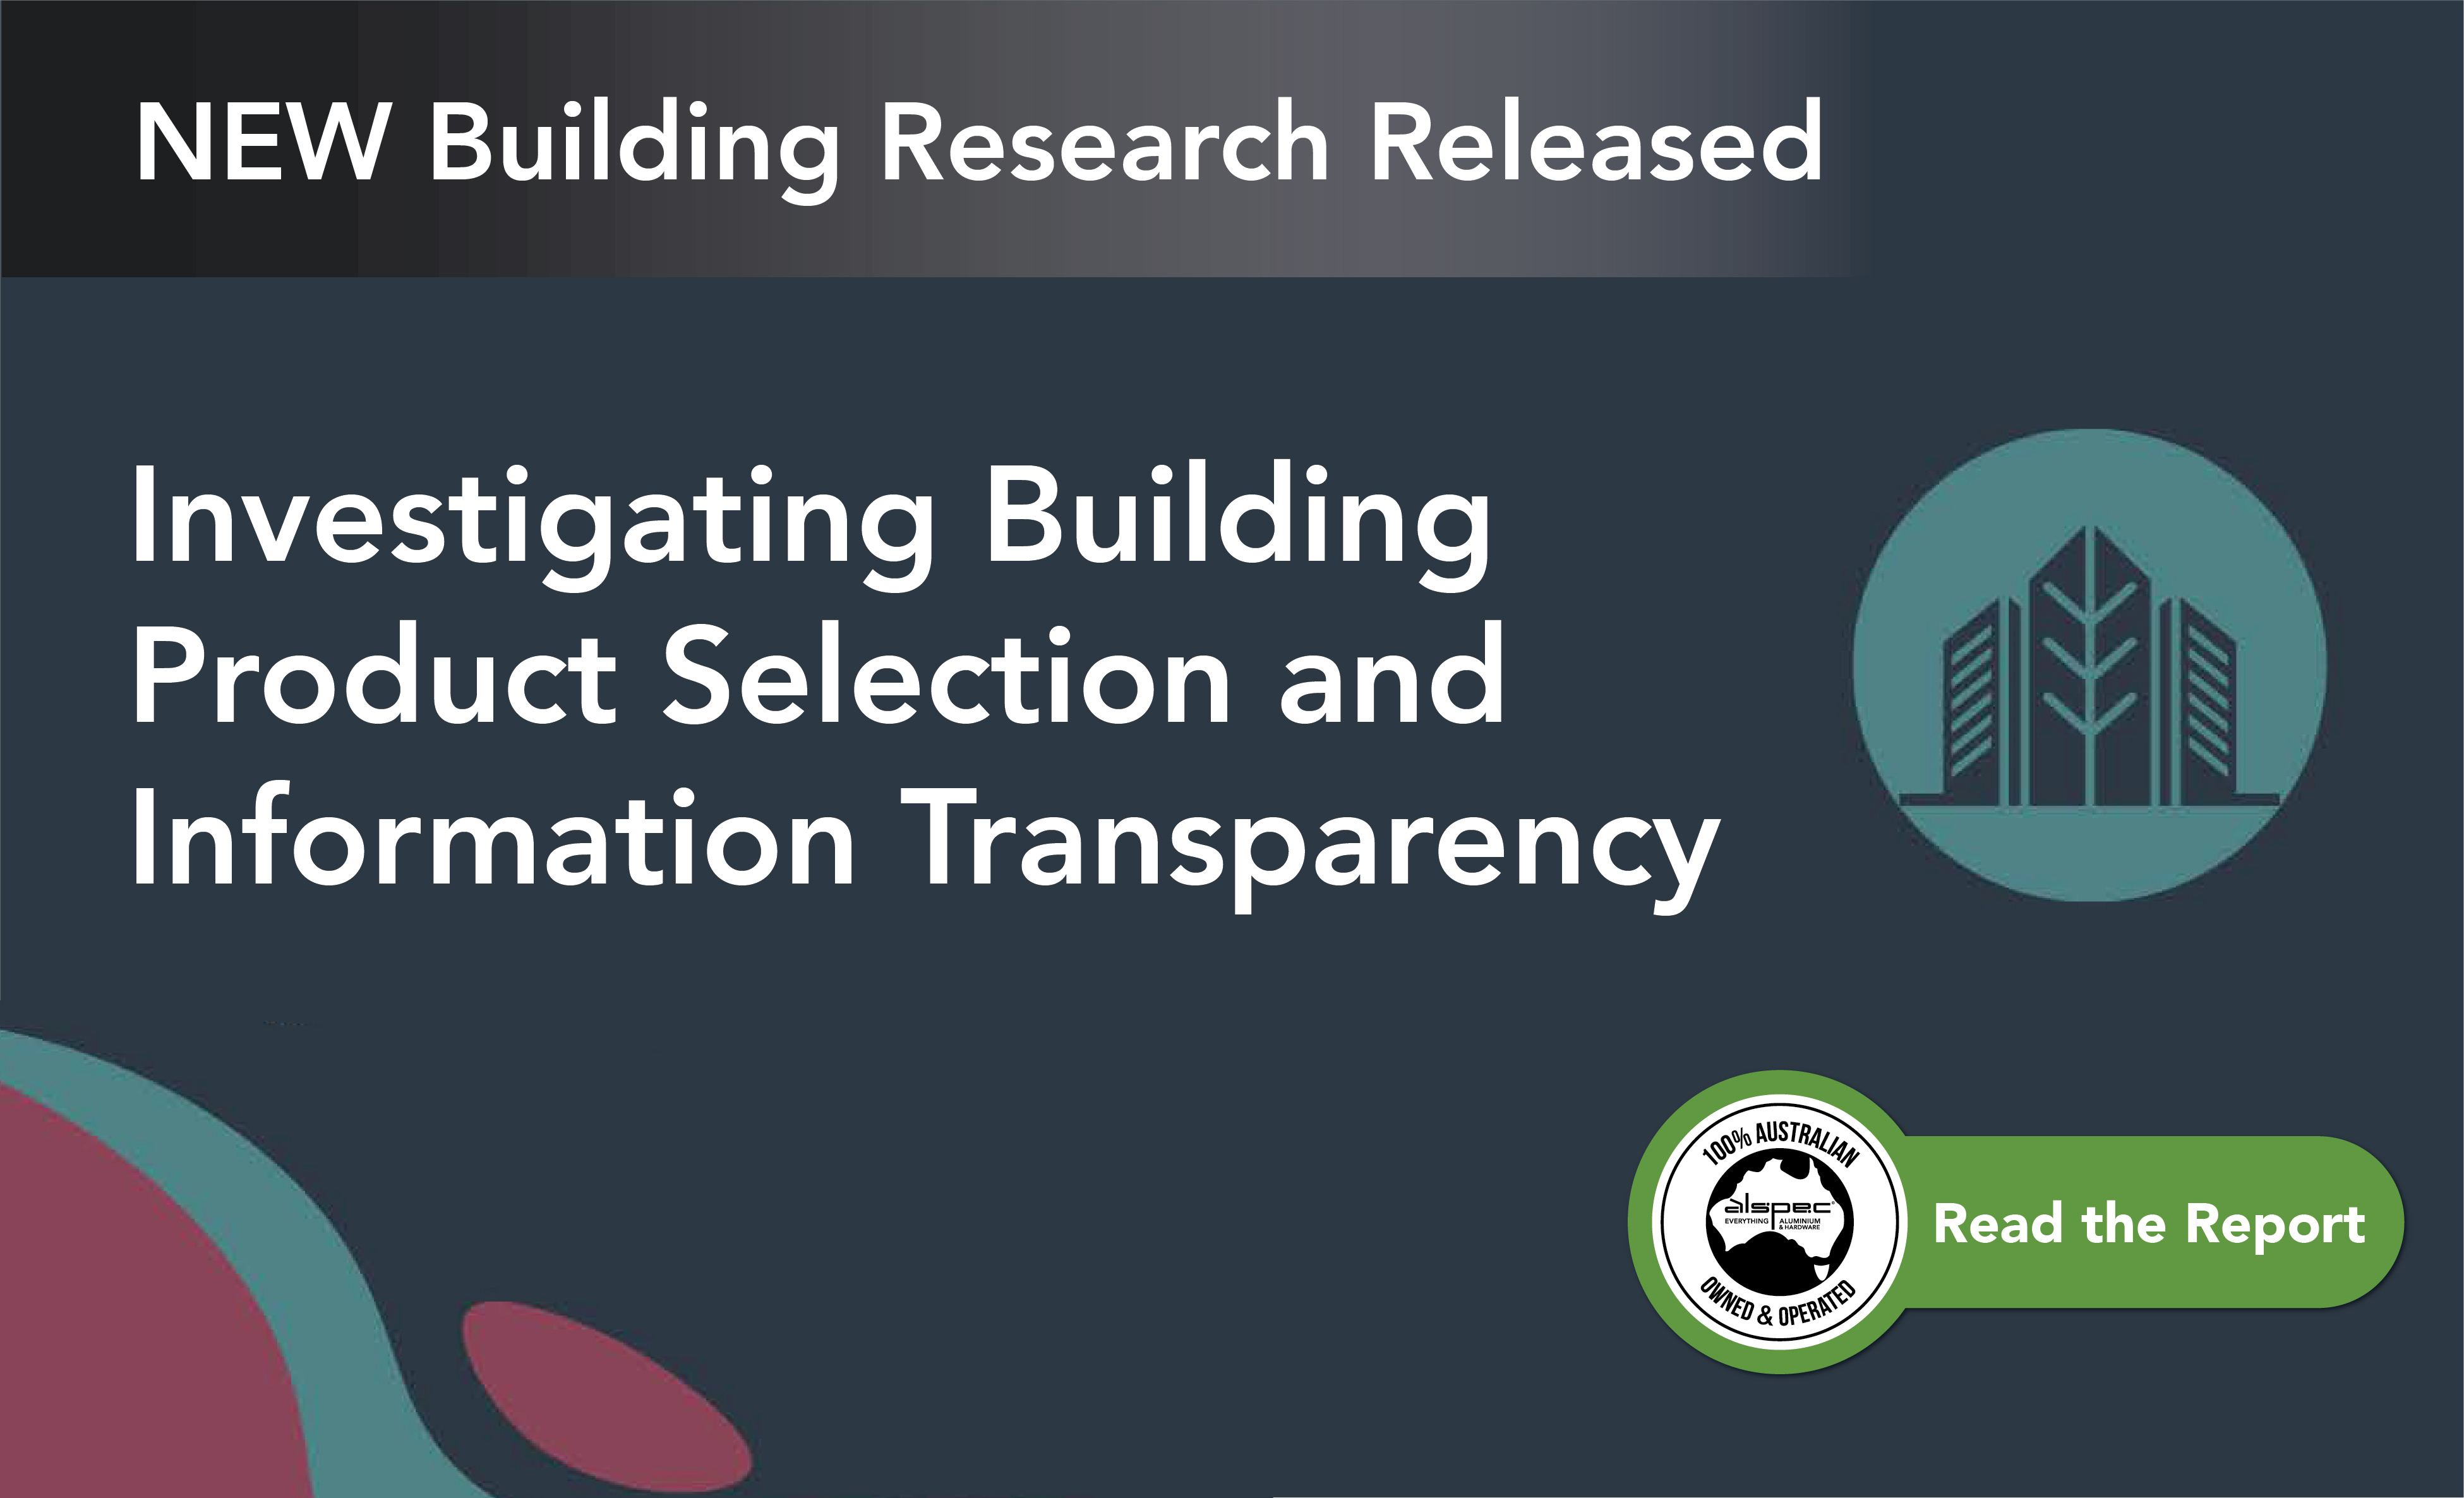 NEW Research Released: Investigating Building Products Selection and Information Transparency